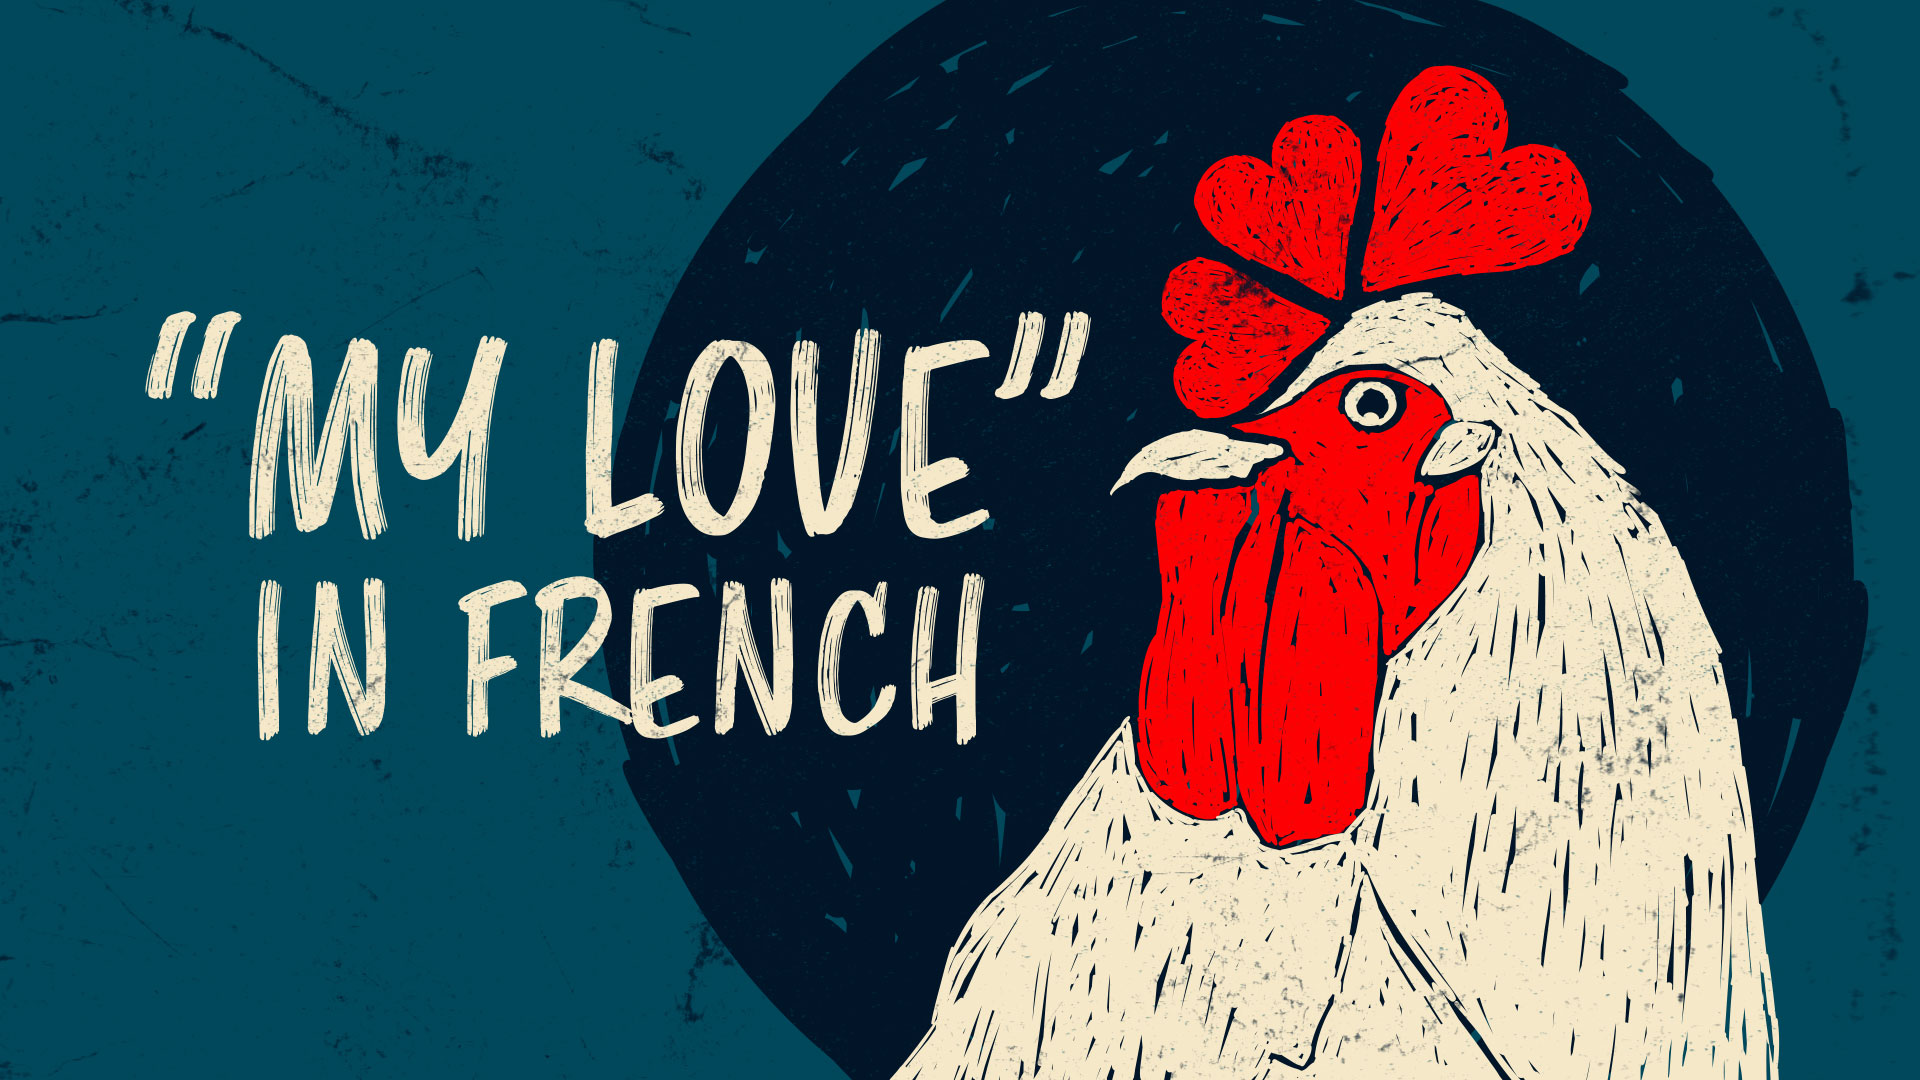 i-love-you-in-french-words-order-prices-save-65-jlcatj-gob-mx